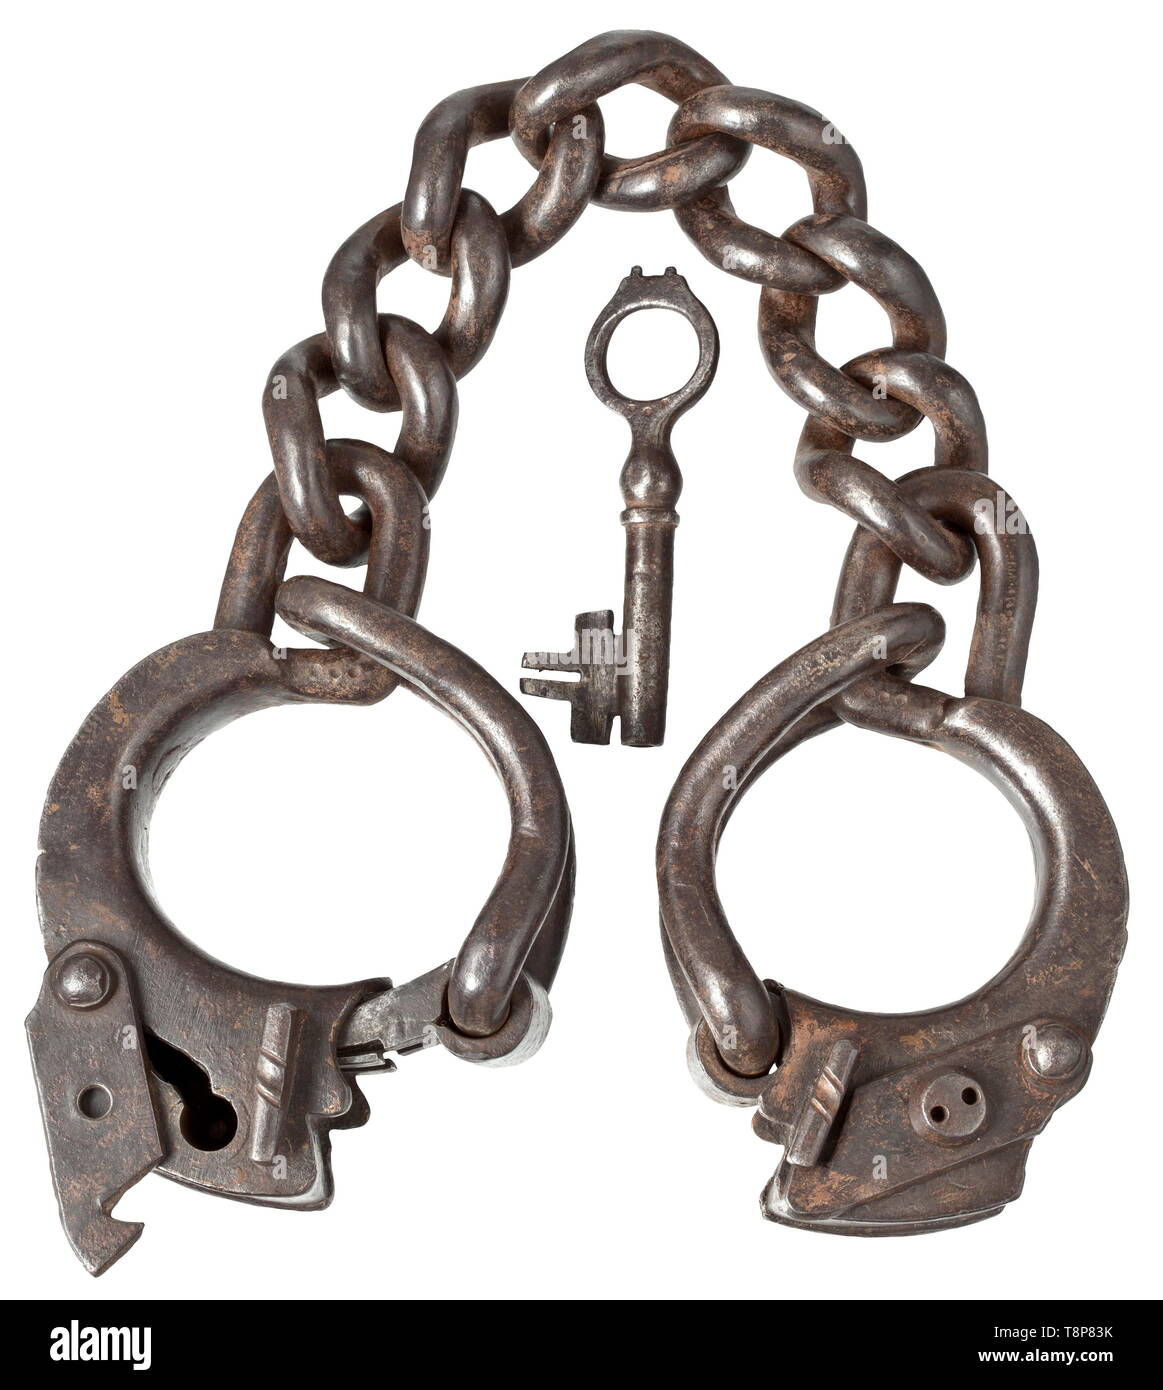 Heavy fetters, 17th/18th century Made of wrought iron. Heavy leg irons connected with a robust chain of seven twisted links. Both shackles with lock clamps and covered and screwable key holes. One of the locks with associated key. Length 62 cm. historic, historical, instrument of torture, torture device, instruments of torture, torture devices, object, objects, stills, clipping, clippings, cut out, cut-out, cut-outs, 18th century, 17th century, Additional-Rights-Clearance-Info-Not-Available Stock Photo